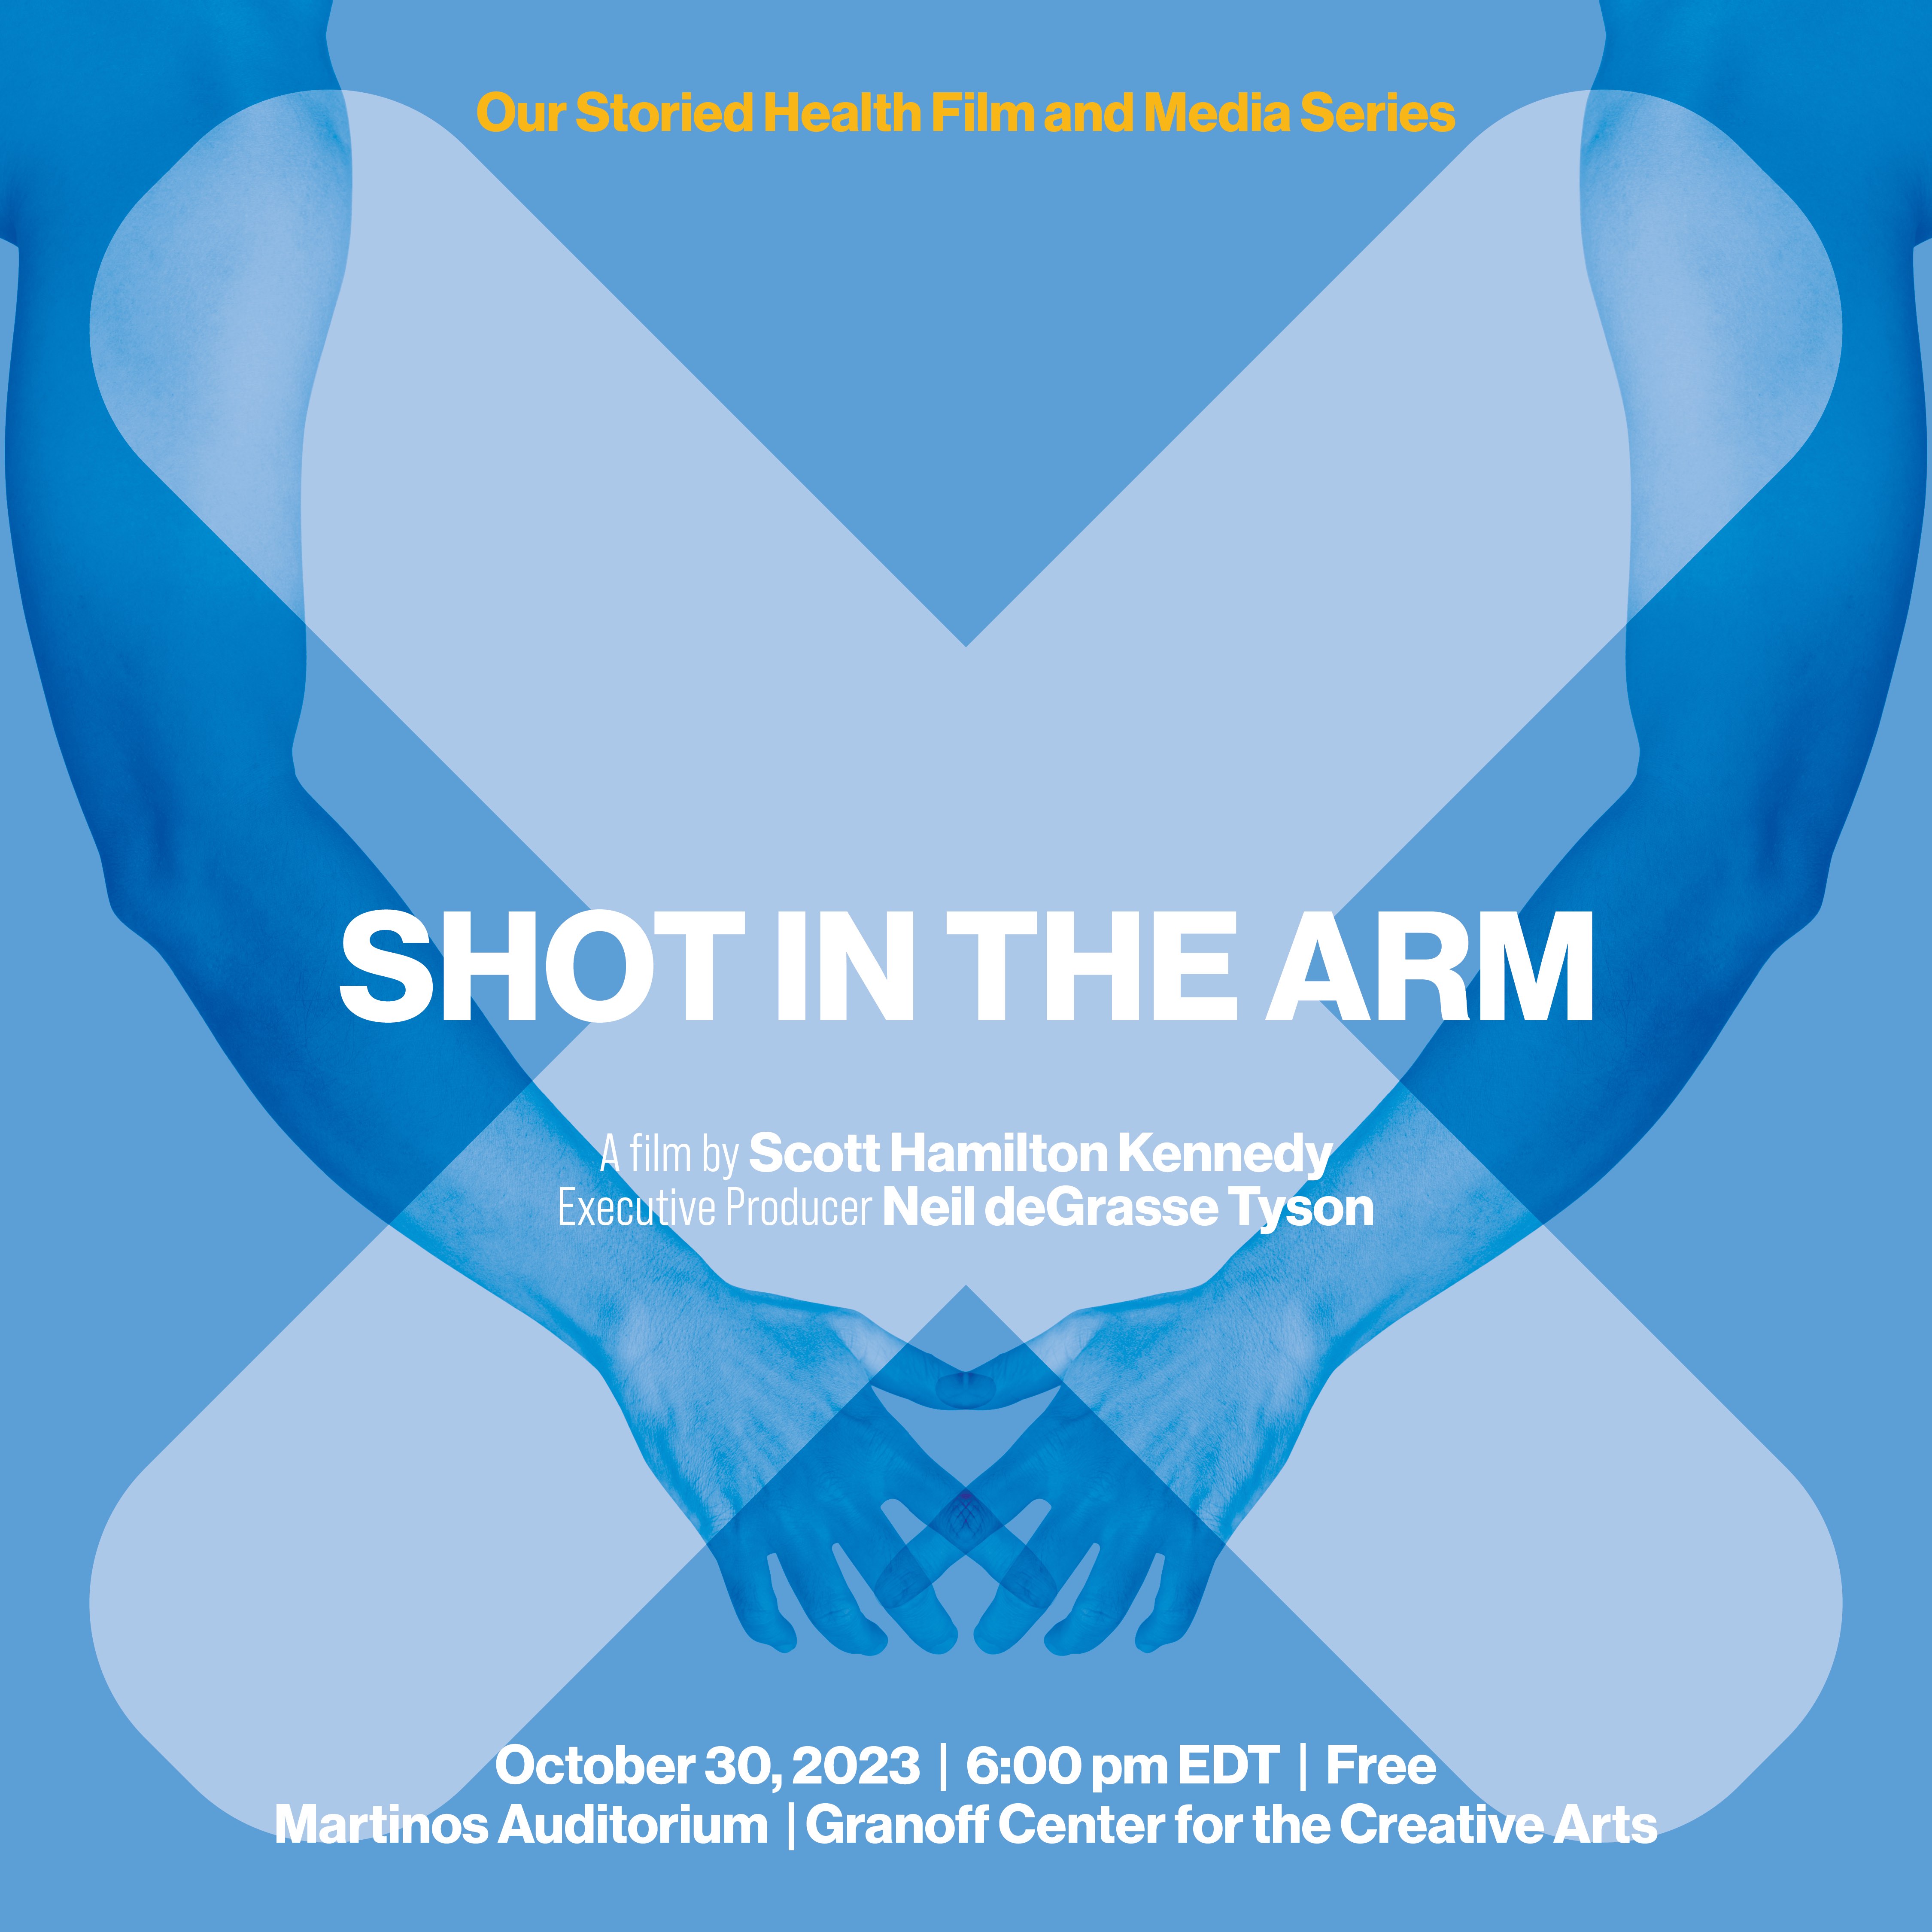 Shot in the Arm. Blue background with large white X in the center, two arms reaching towards each other.